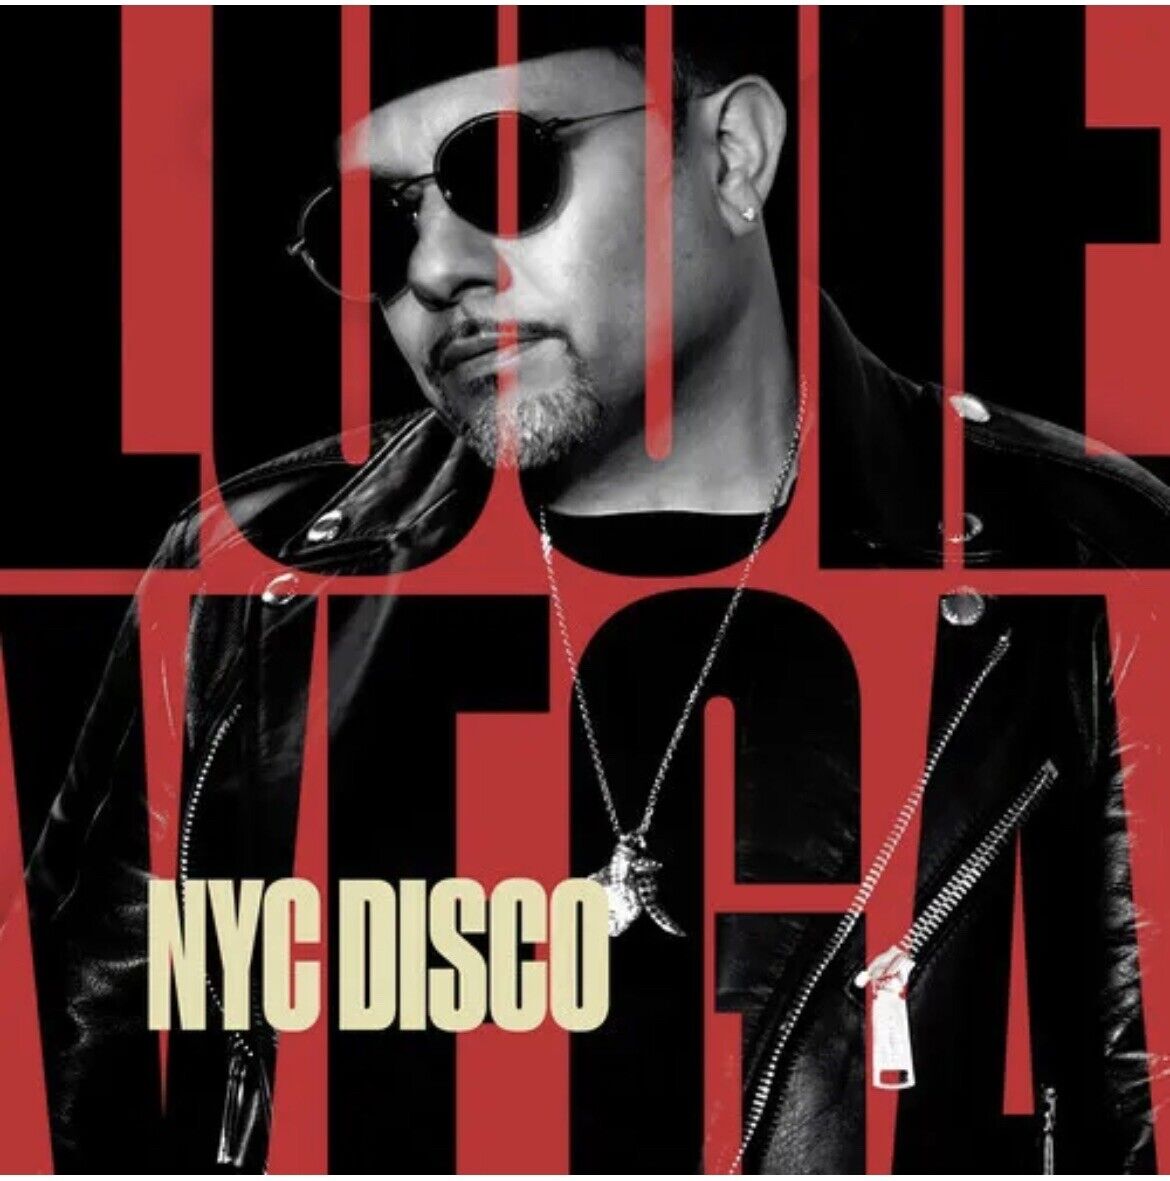 LITTLE LOUIE VEGA - NYC DISCO * Brand NEW CD Factory Sealed